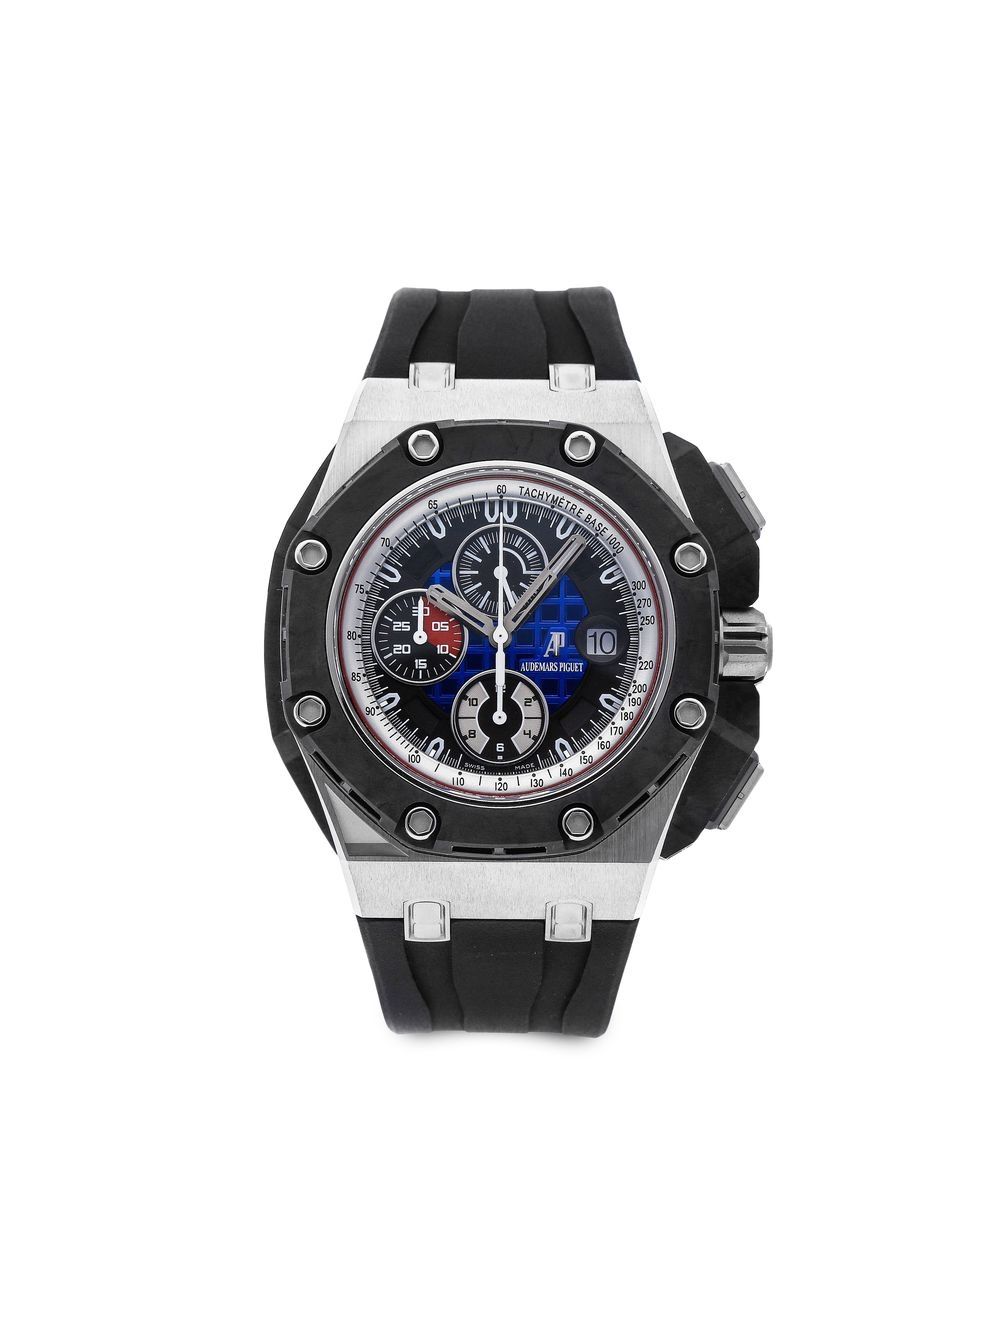 Pre-owned Audemars Piguet 2010  Royal Oak Offshore Grand Prix Chronograph Limited Edition 44mm In Blue